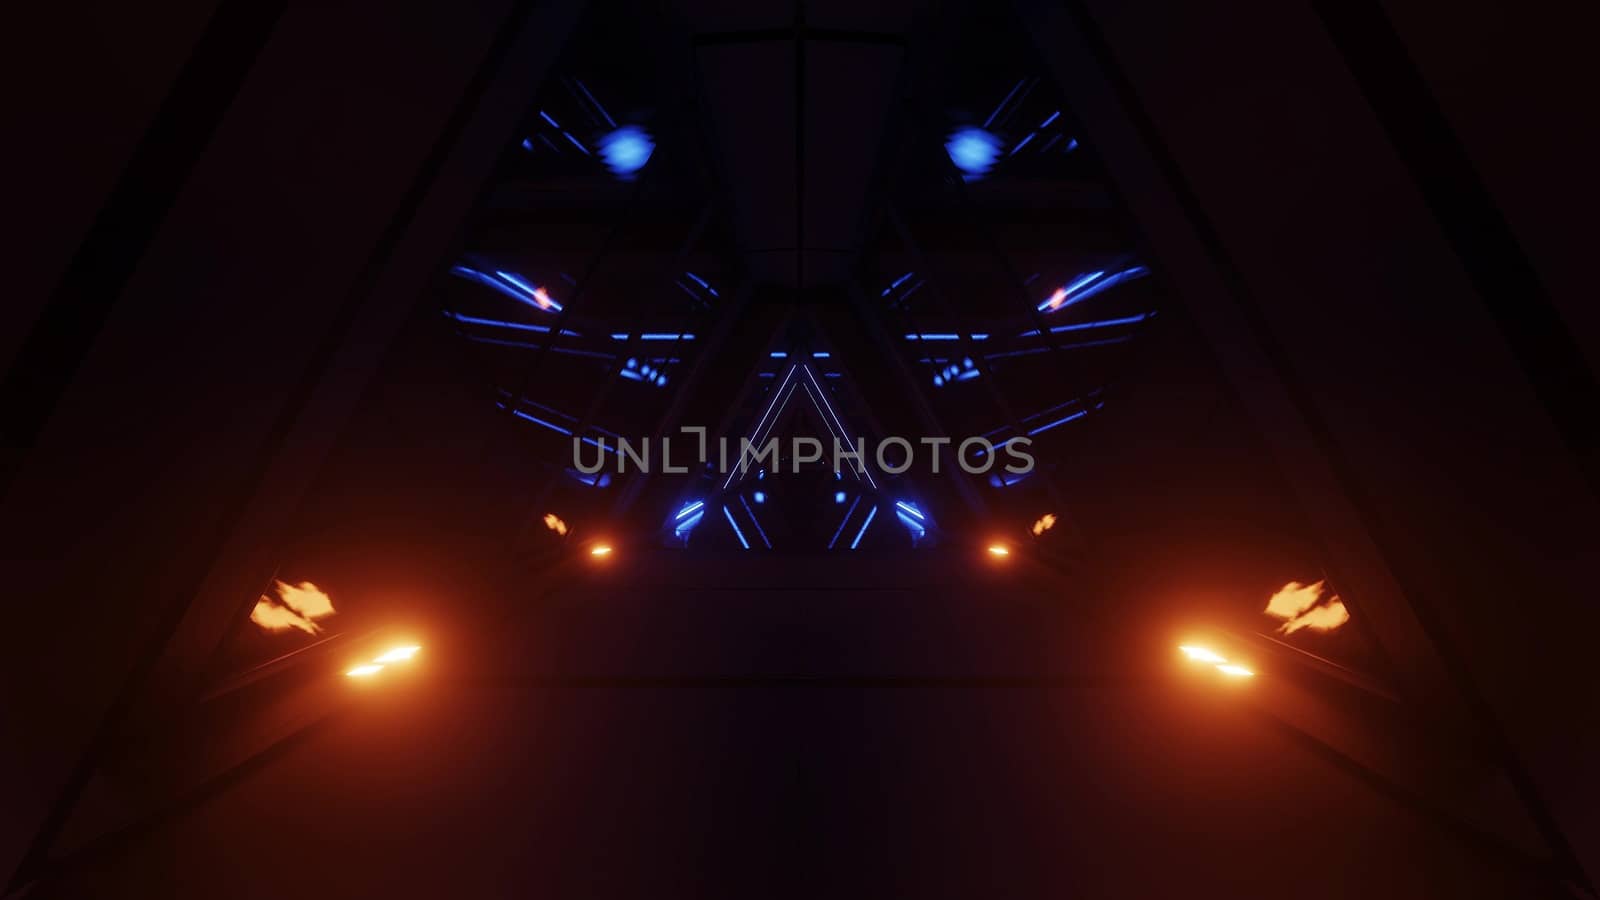 abstract dark glowing triangle graphic design artwork with reflective wet water or glass bottom 3d illustration background wallpaper, triangle alien space ship tunnel corridor 3d rendering design